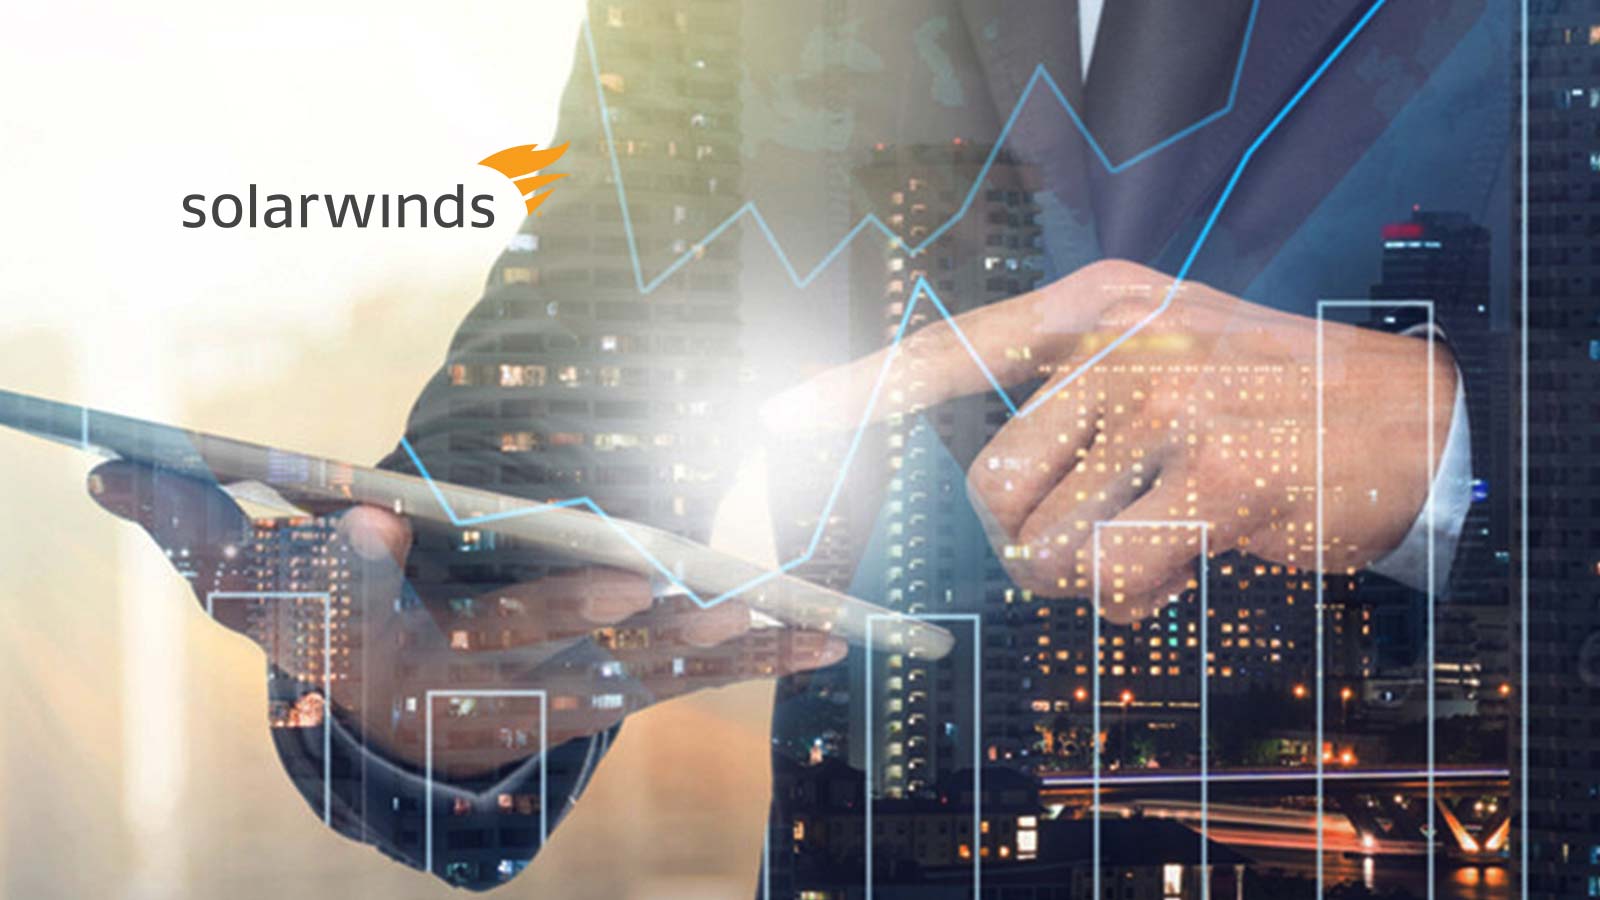 SolarWinds IT Operations Management software & managed services